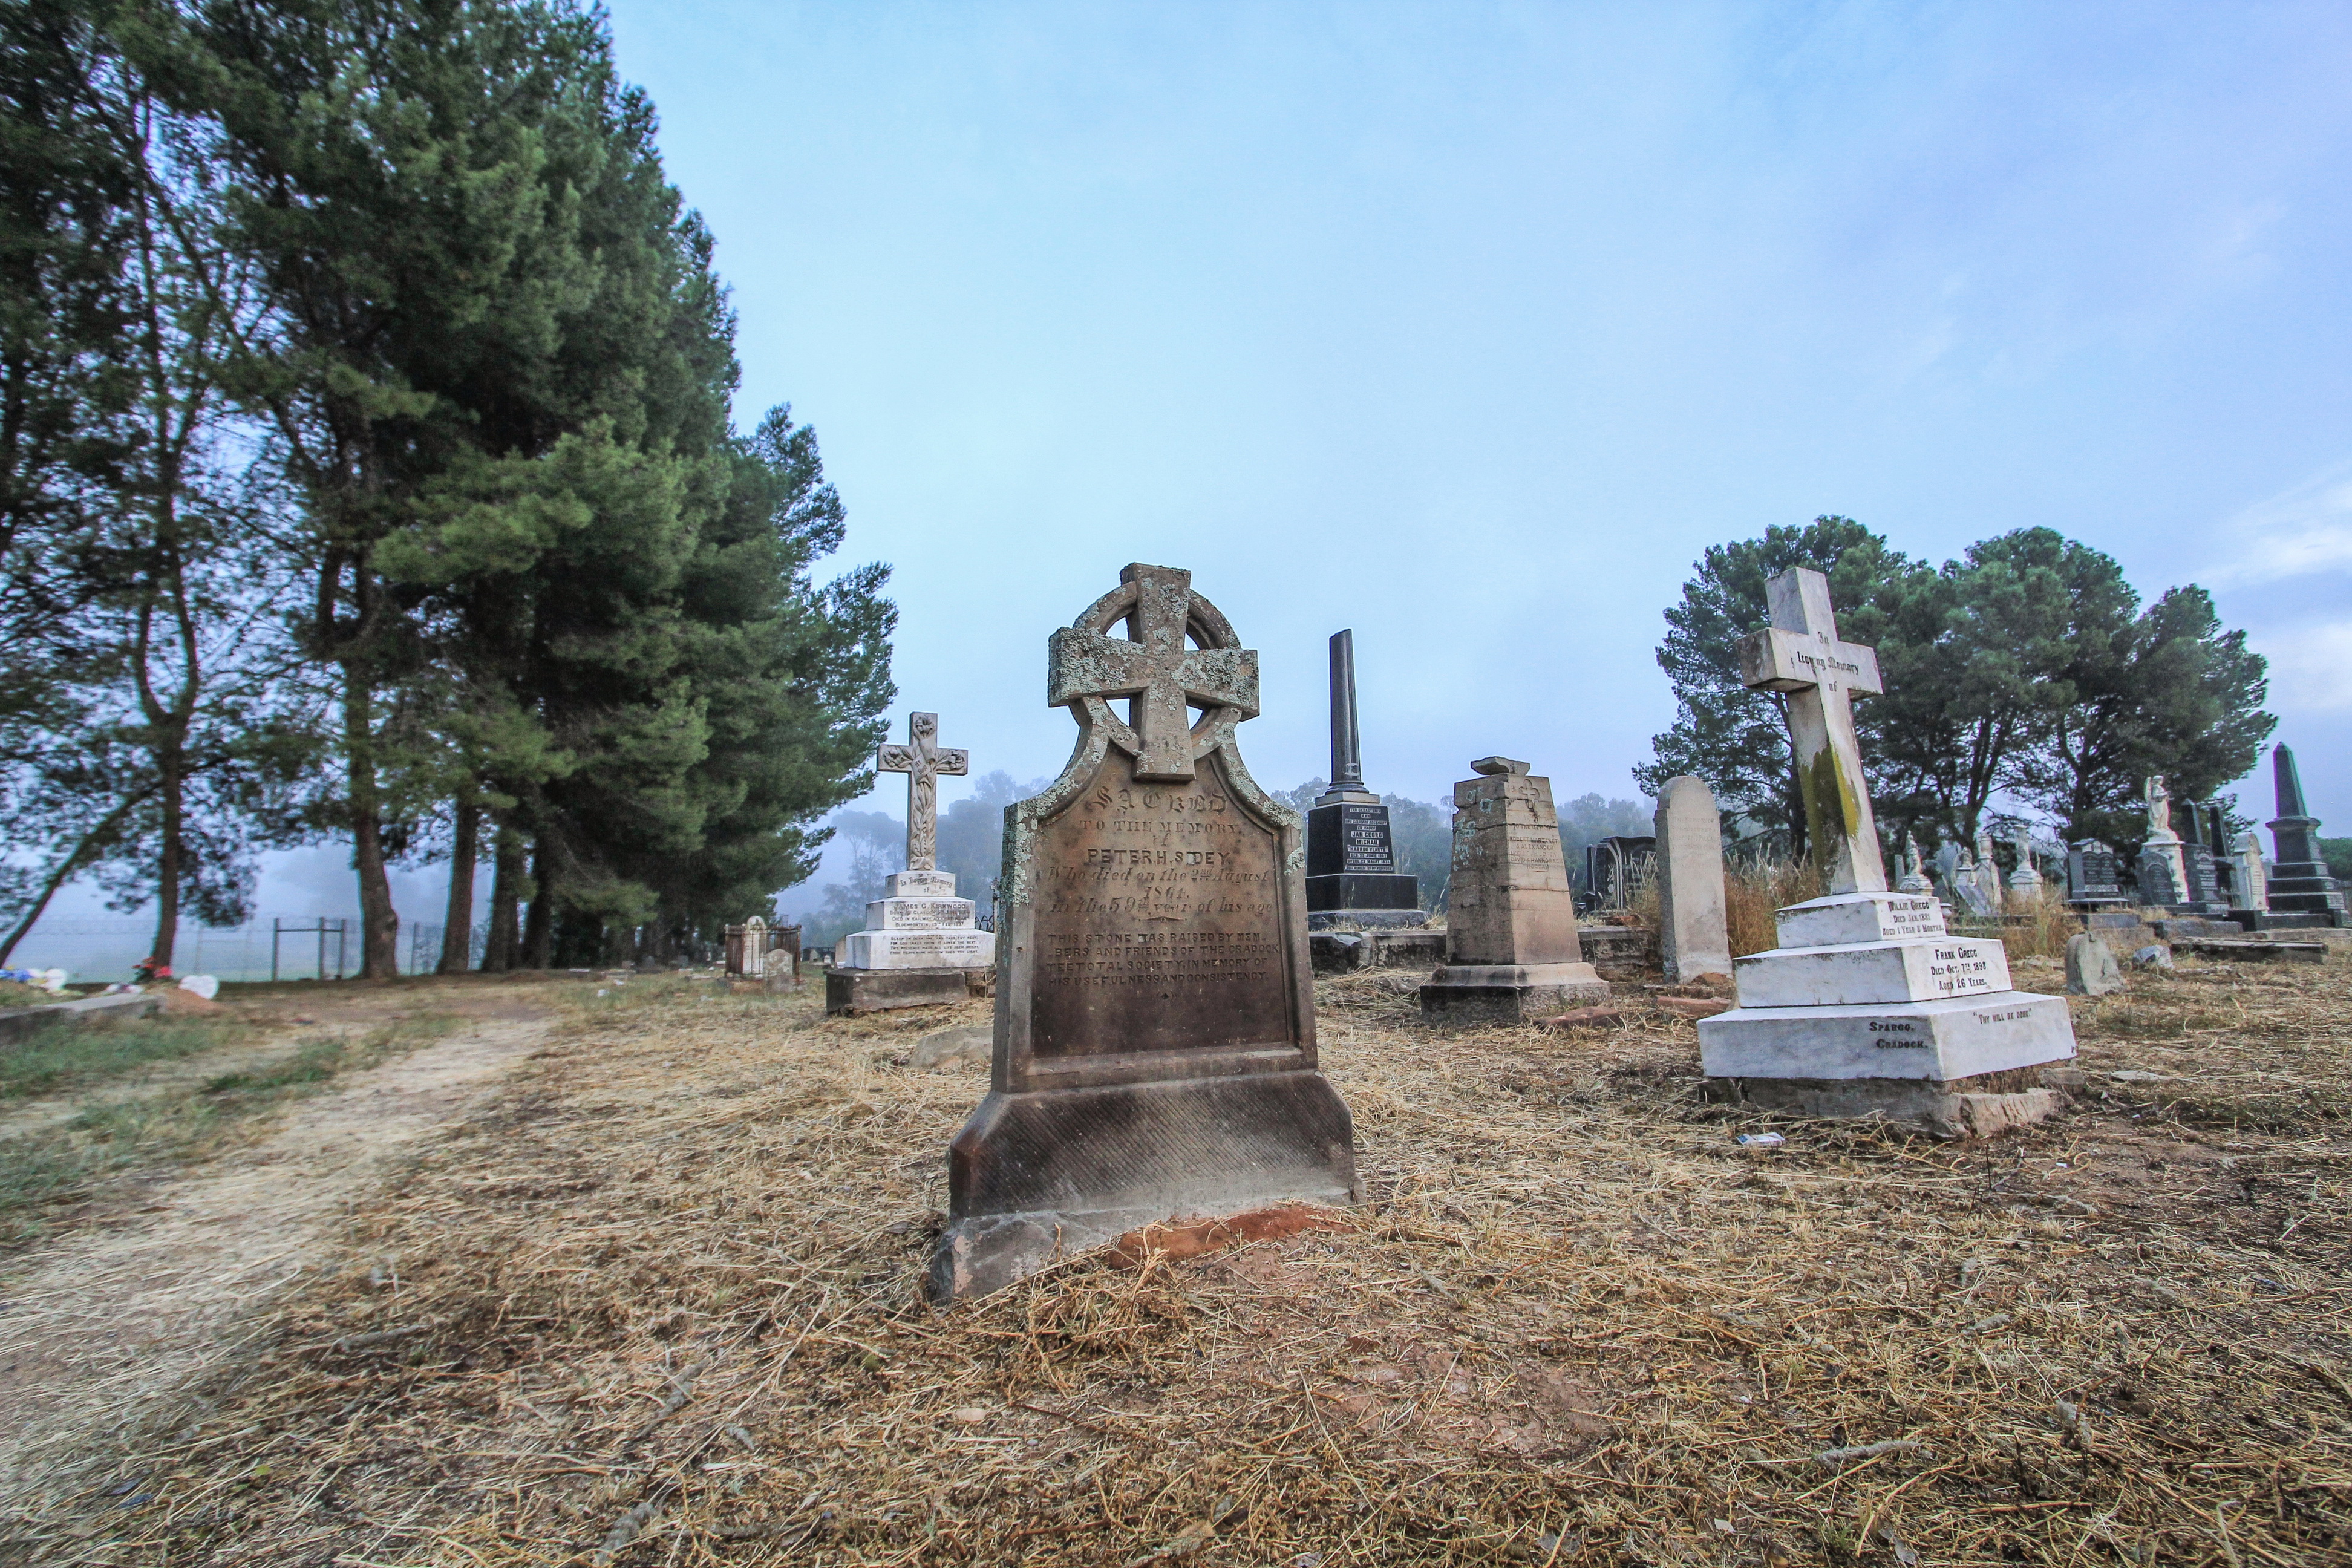 The last remains of Peter Sidey, laid to rest here by the Cradock Teetotal Society. Image: Chris Marais